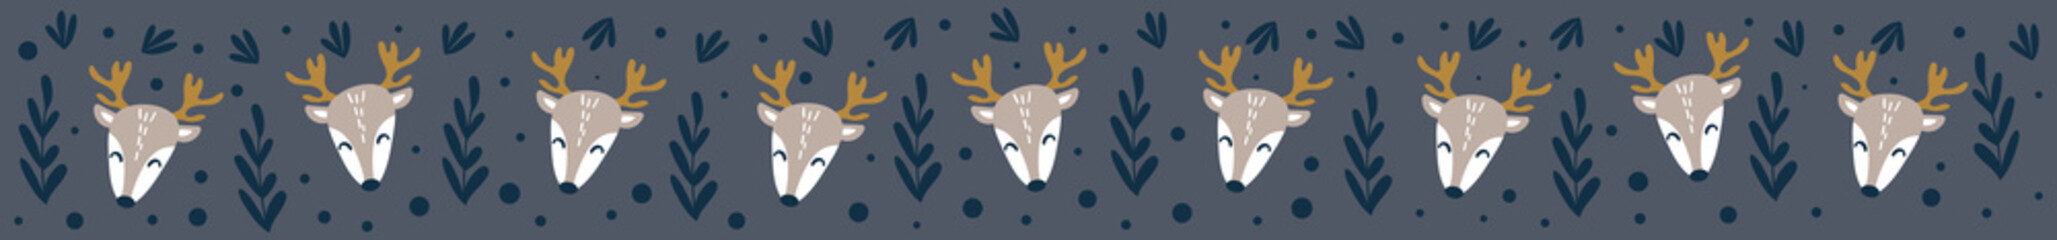 Long web banner with cute deer faces. Social media cover image. Flat vector illustration.